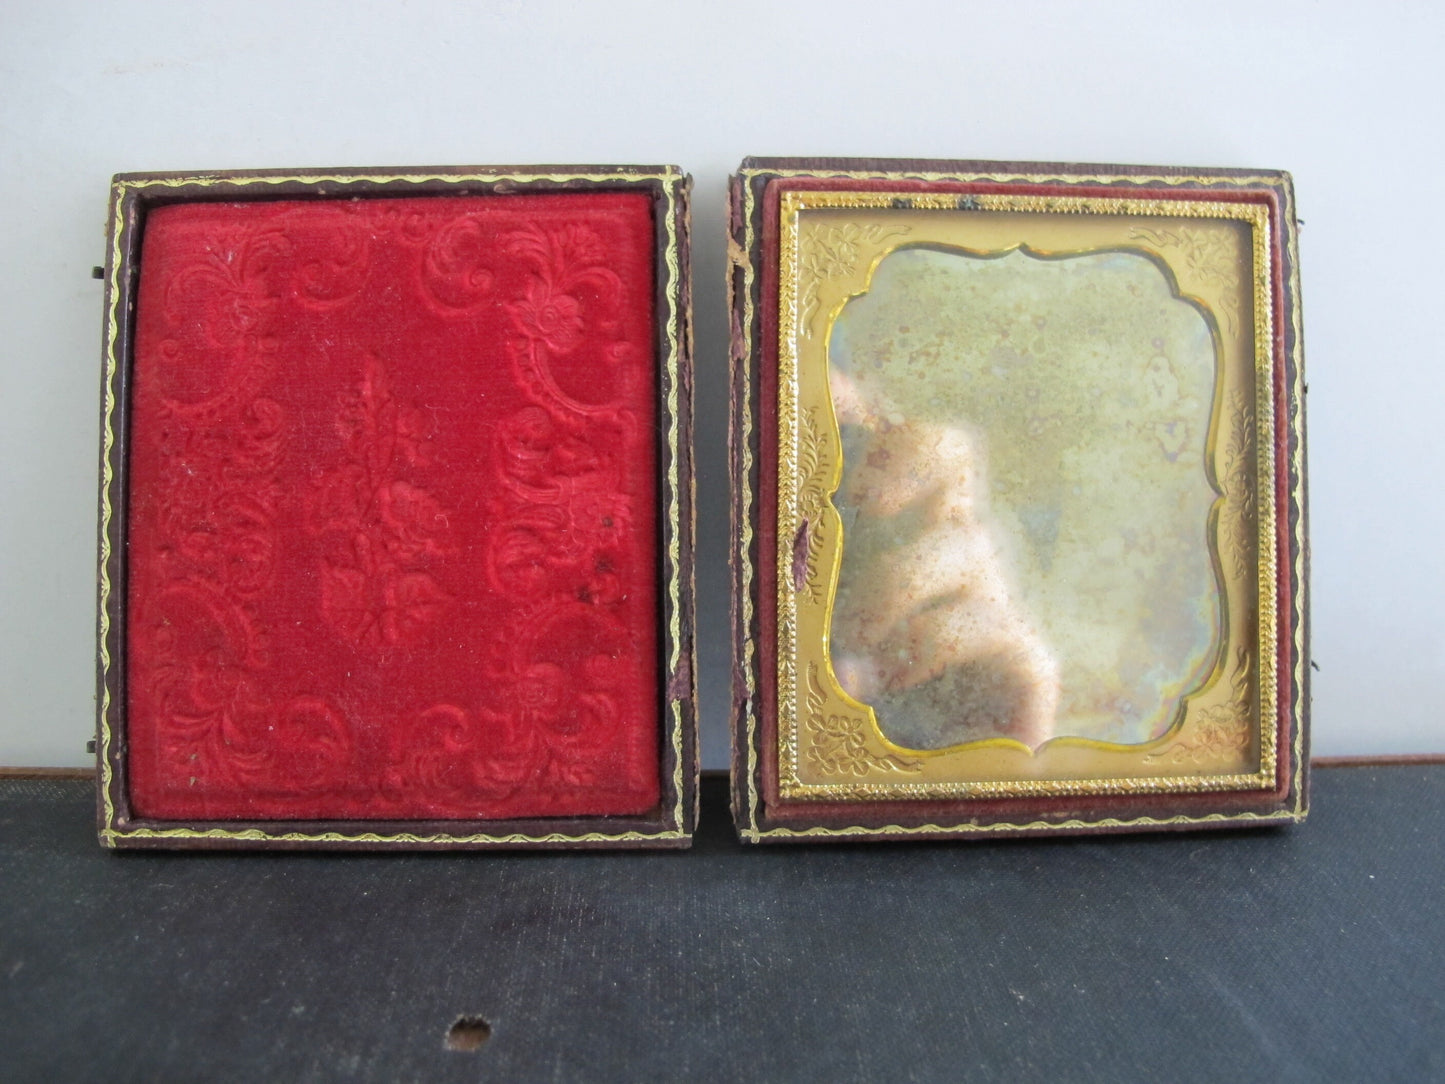 Daguerreotype Cased in Leather Birds Doves Eating Grapes Reference to Zeuxis Young Man 1850s 1860s Victorian